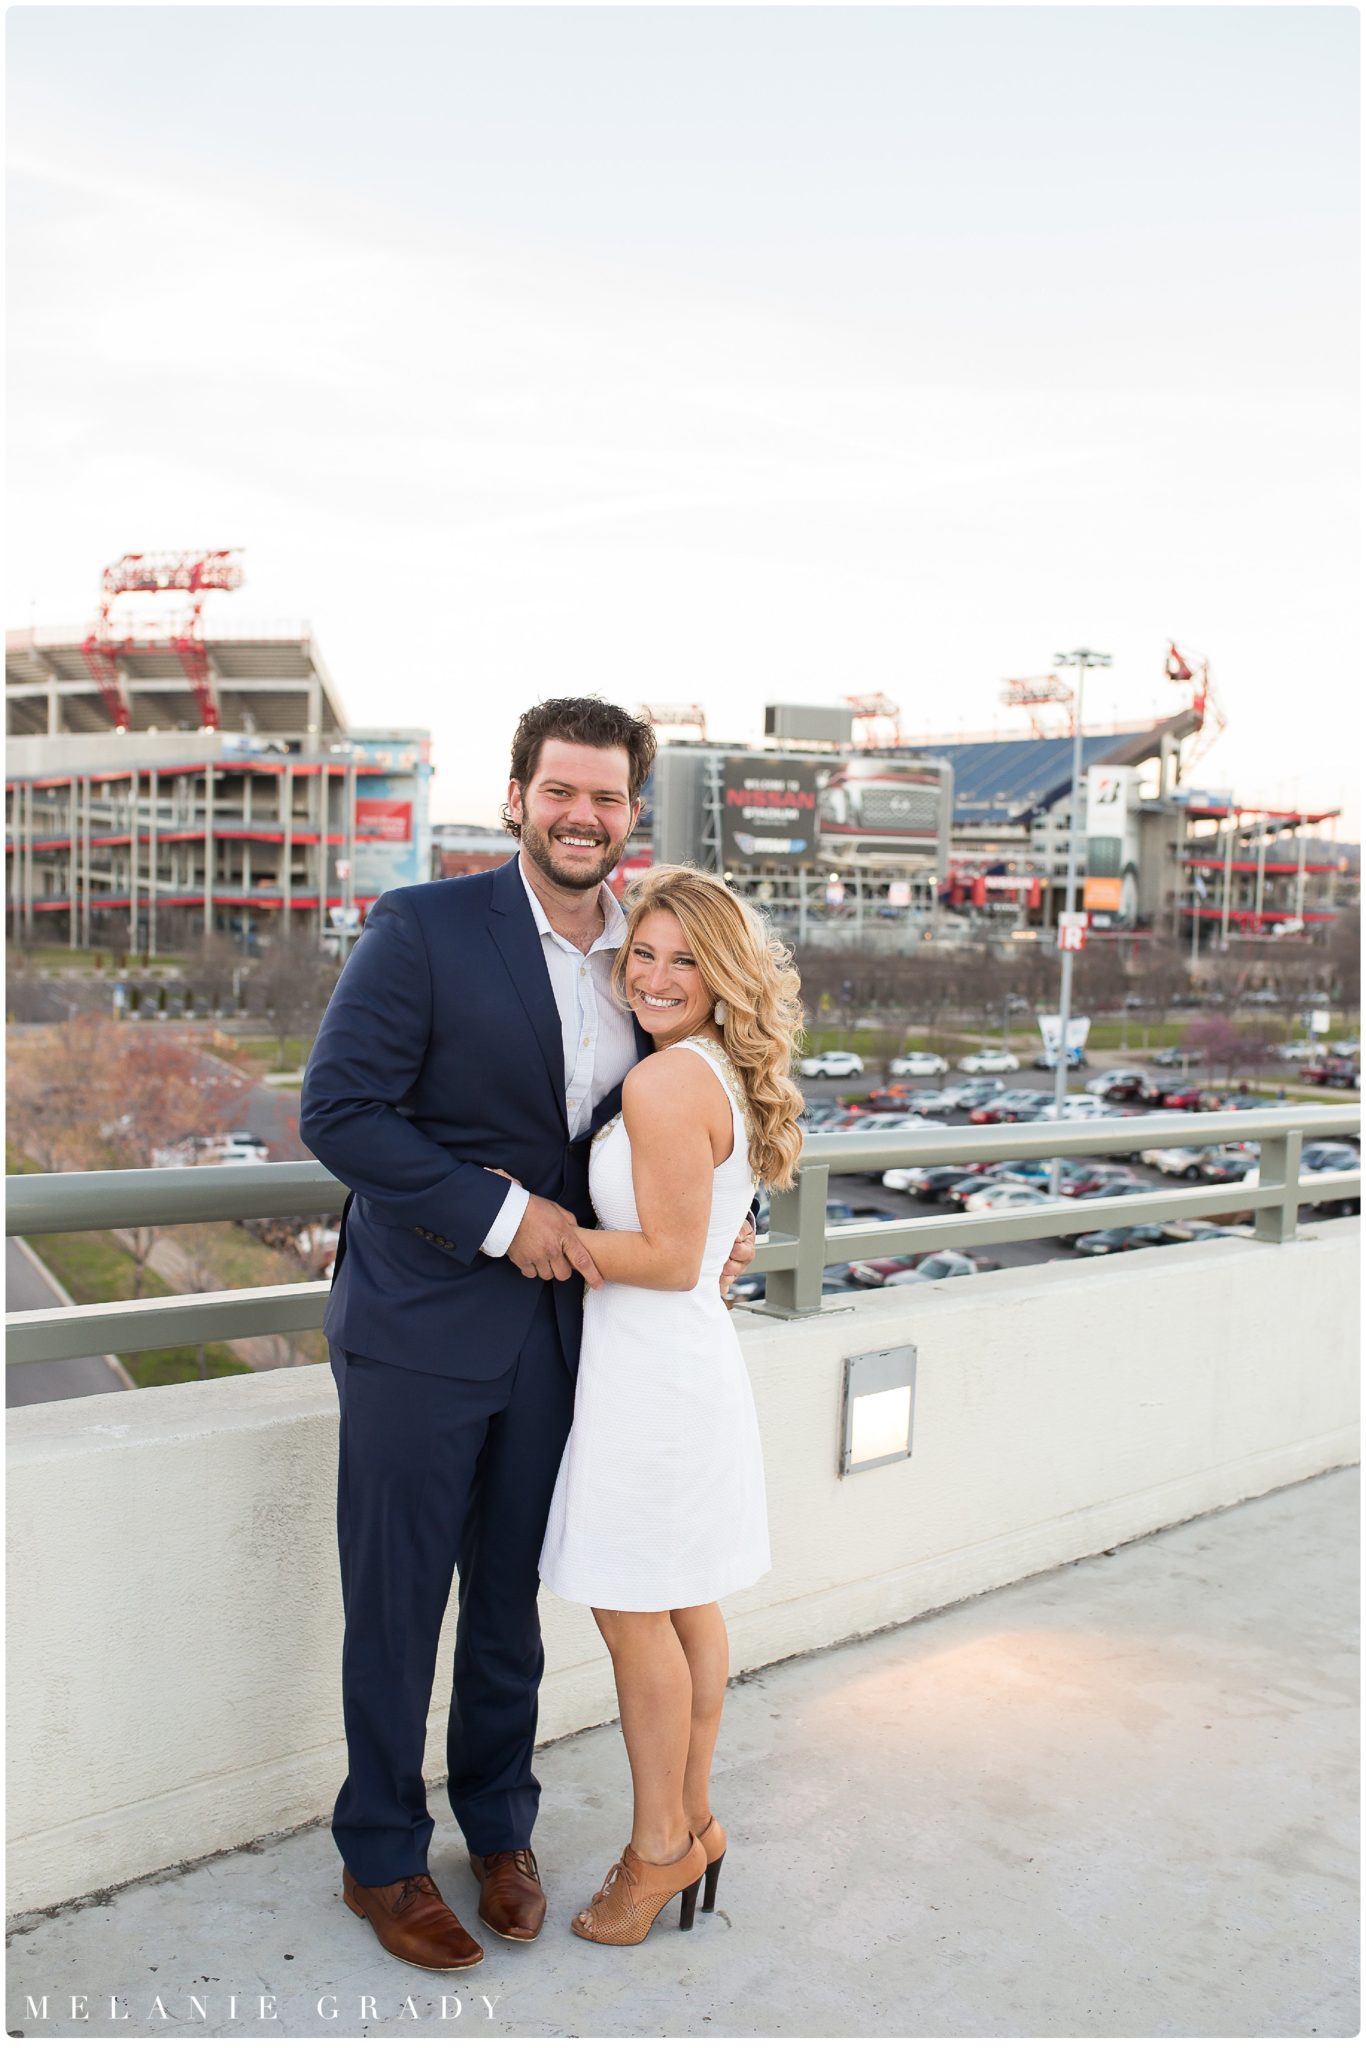 Nashville engagement photographer, downtown Nashville engagement session, , The Pedestrian Bridge, Nissan Stadium, southern engagement session, Spring engagement session, engagement session, melanie grady photography, www.melaniegrady.com, country engagement photography, luxury engagement photography, engaged, bride and groom to be, nashville's best wedding photographer, nashville wedding photographer